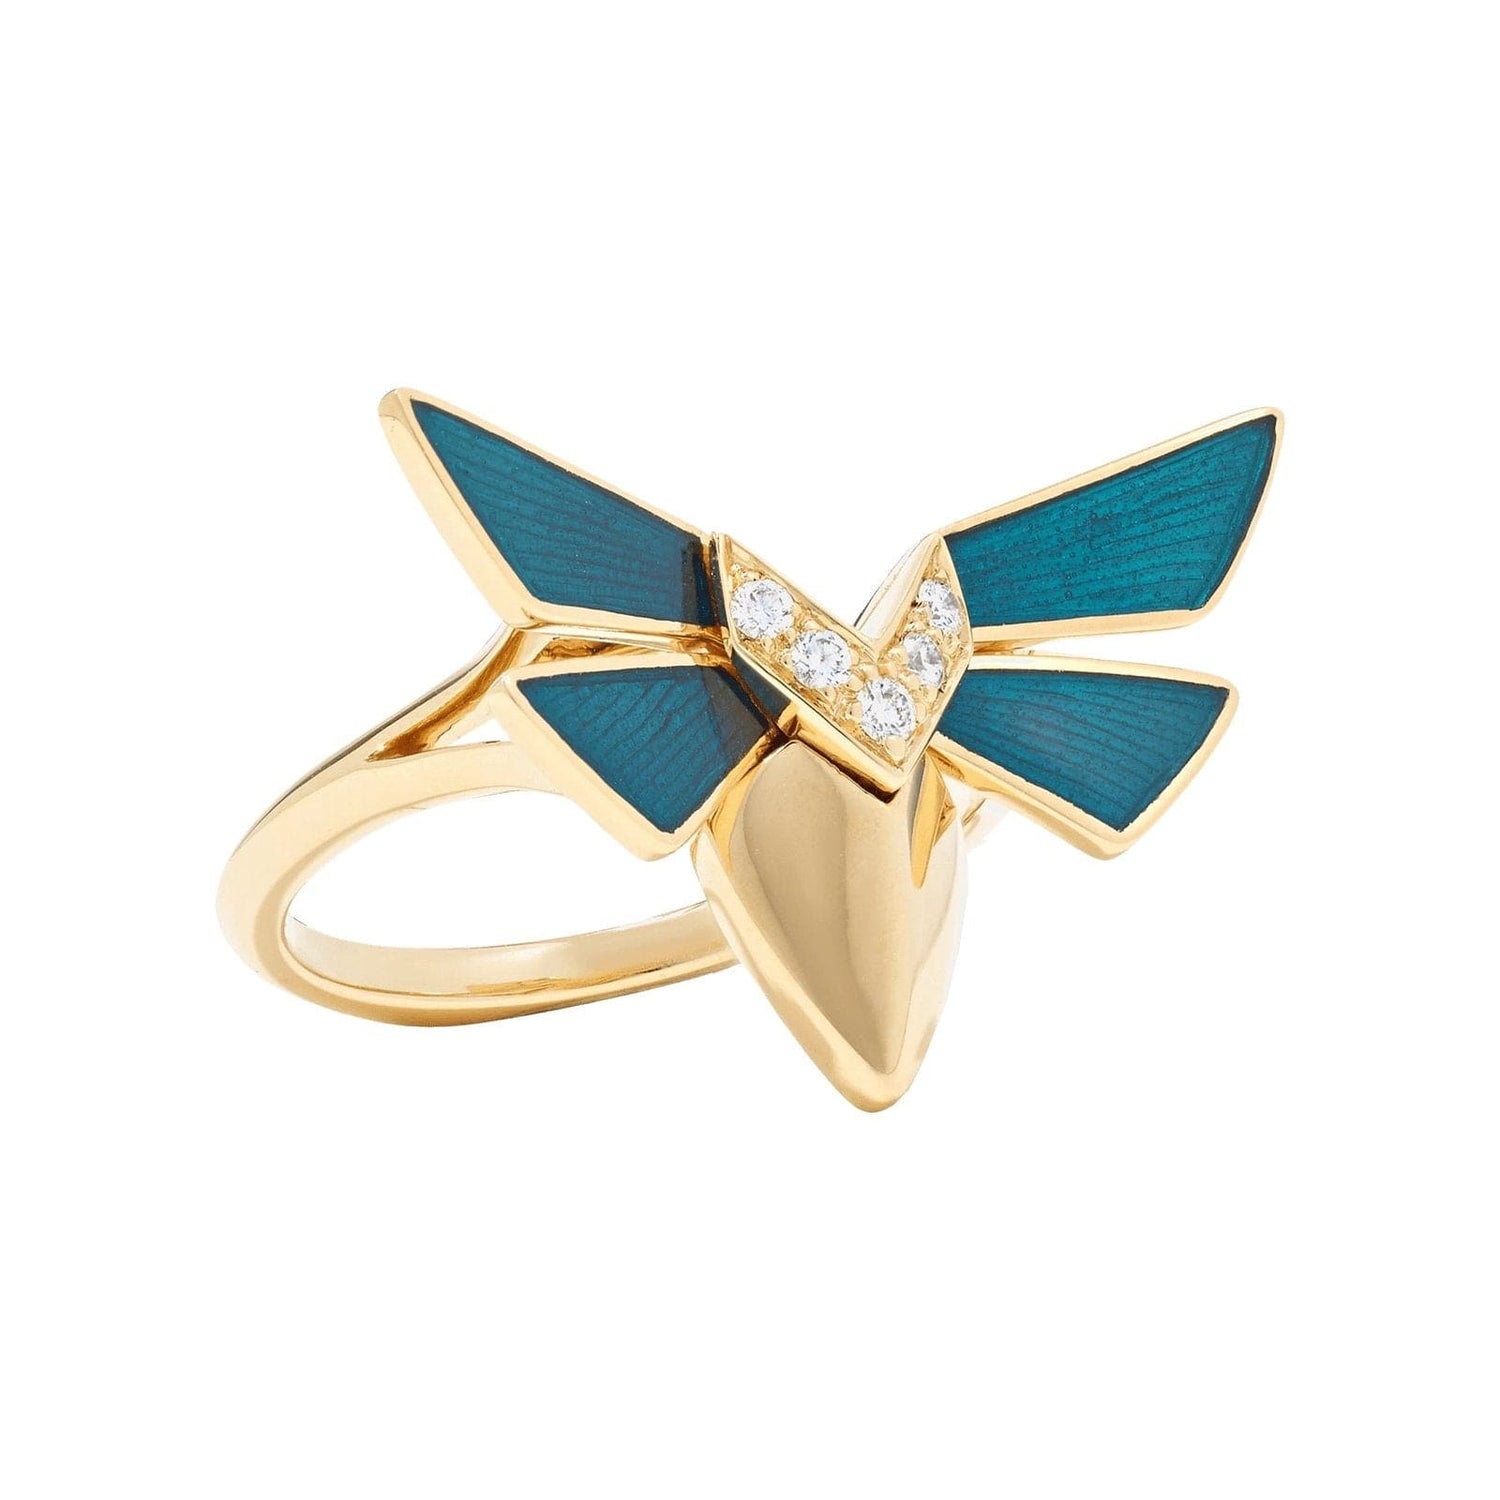 Jitterbug Stacking Ring with Diamond and Turquoise Enamel Accents - Stephen Webster- Diamond Cellar